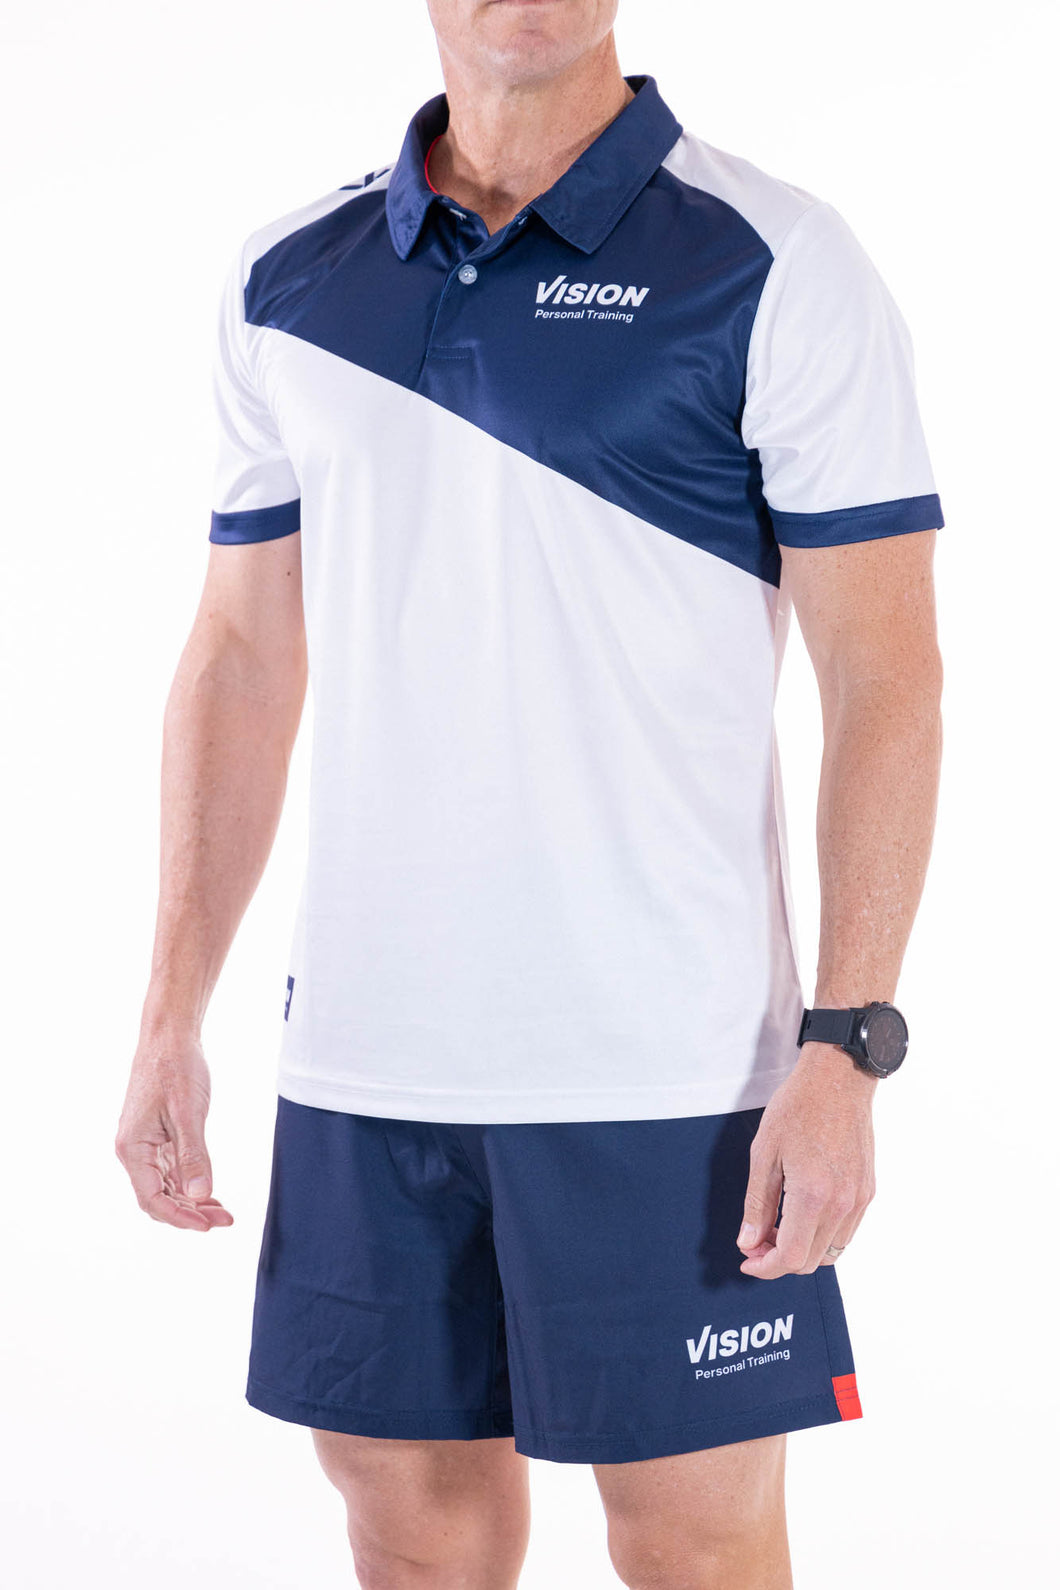 MENS – OWNER/MANAGER POLO